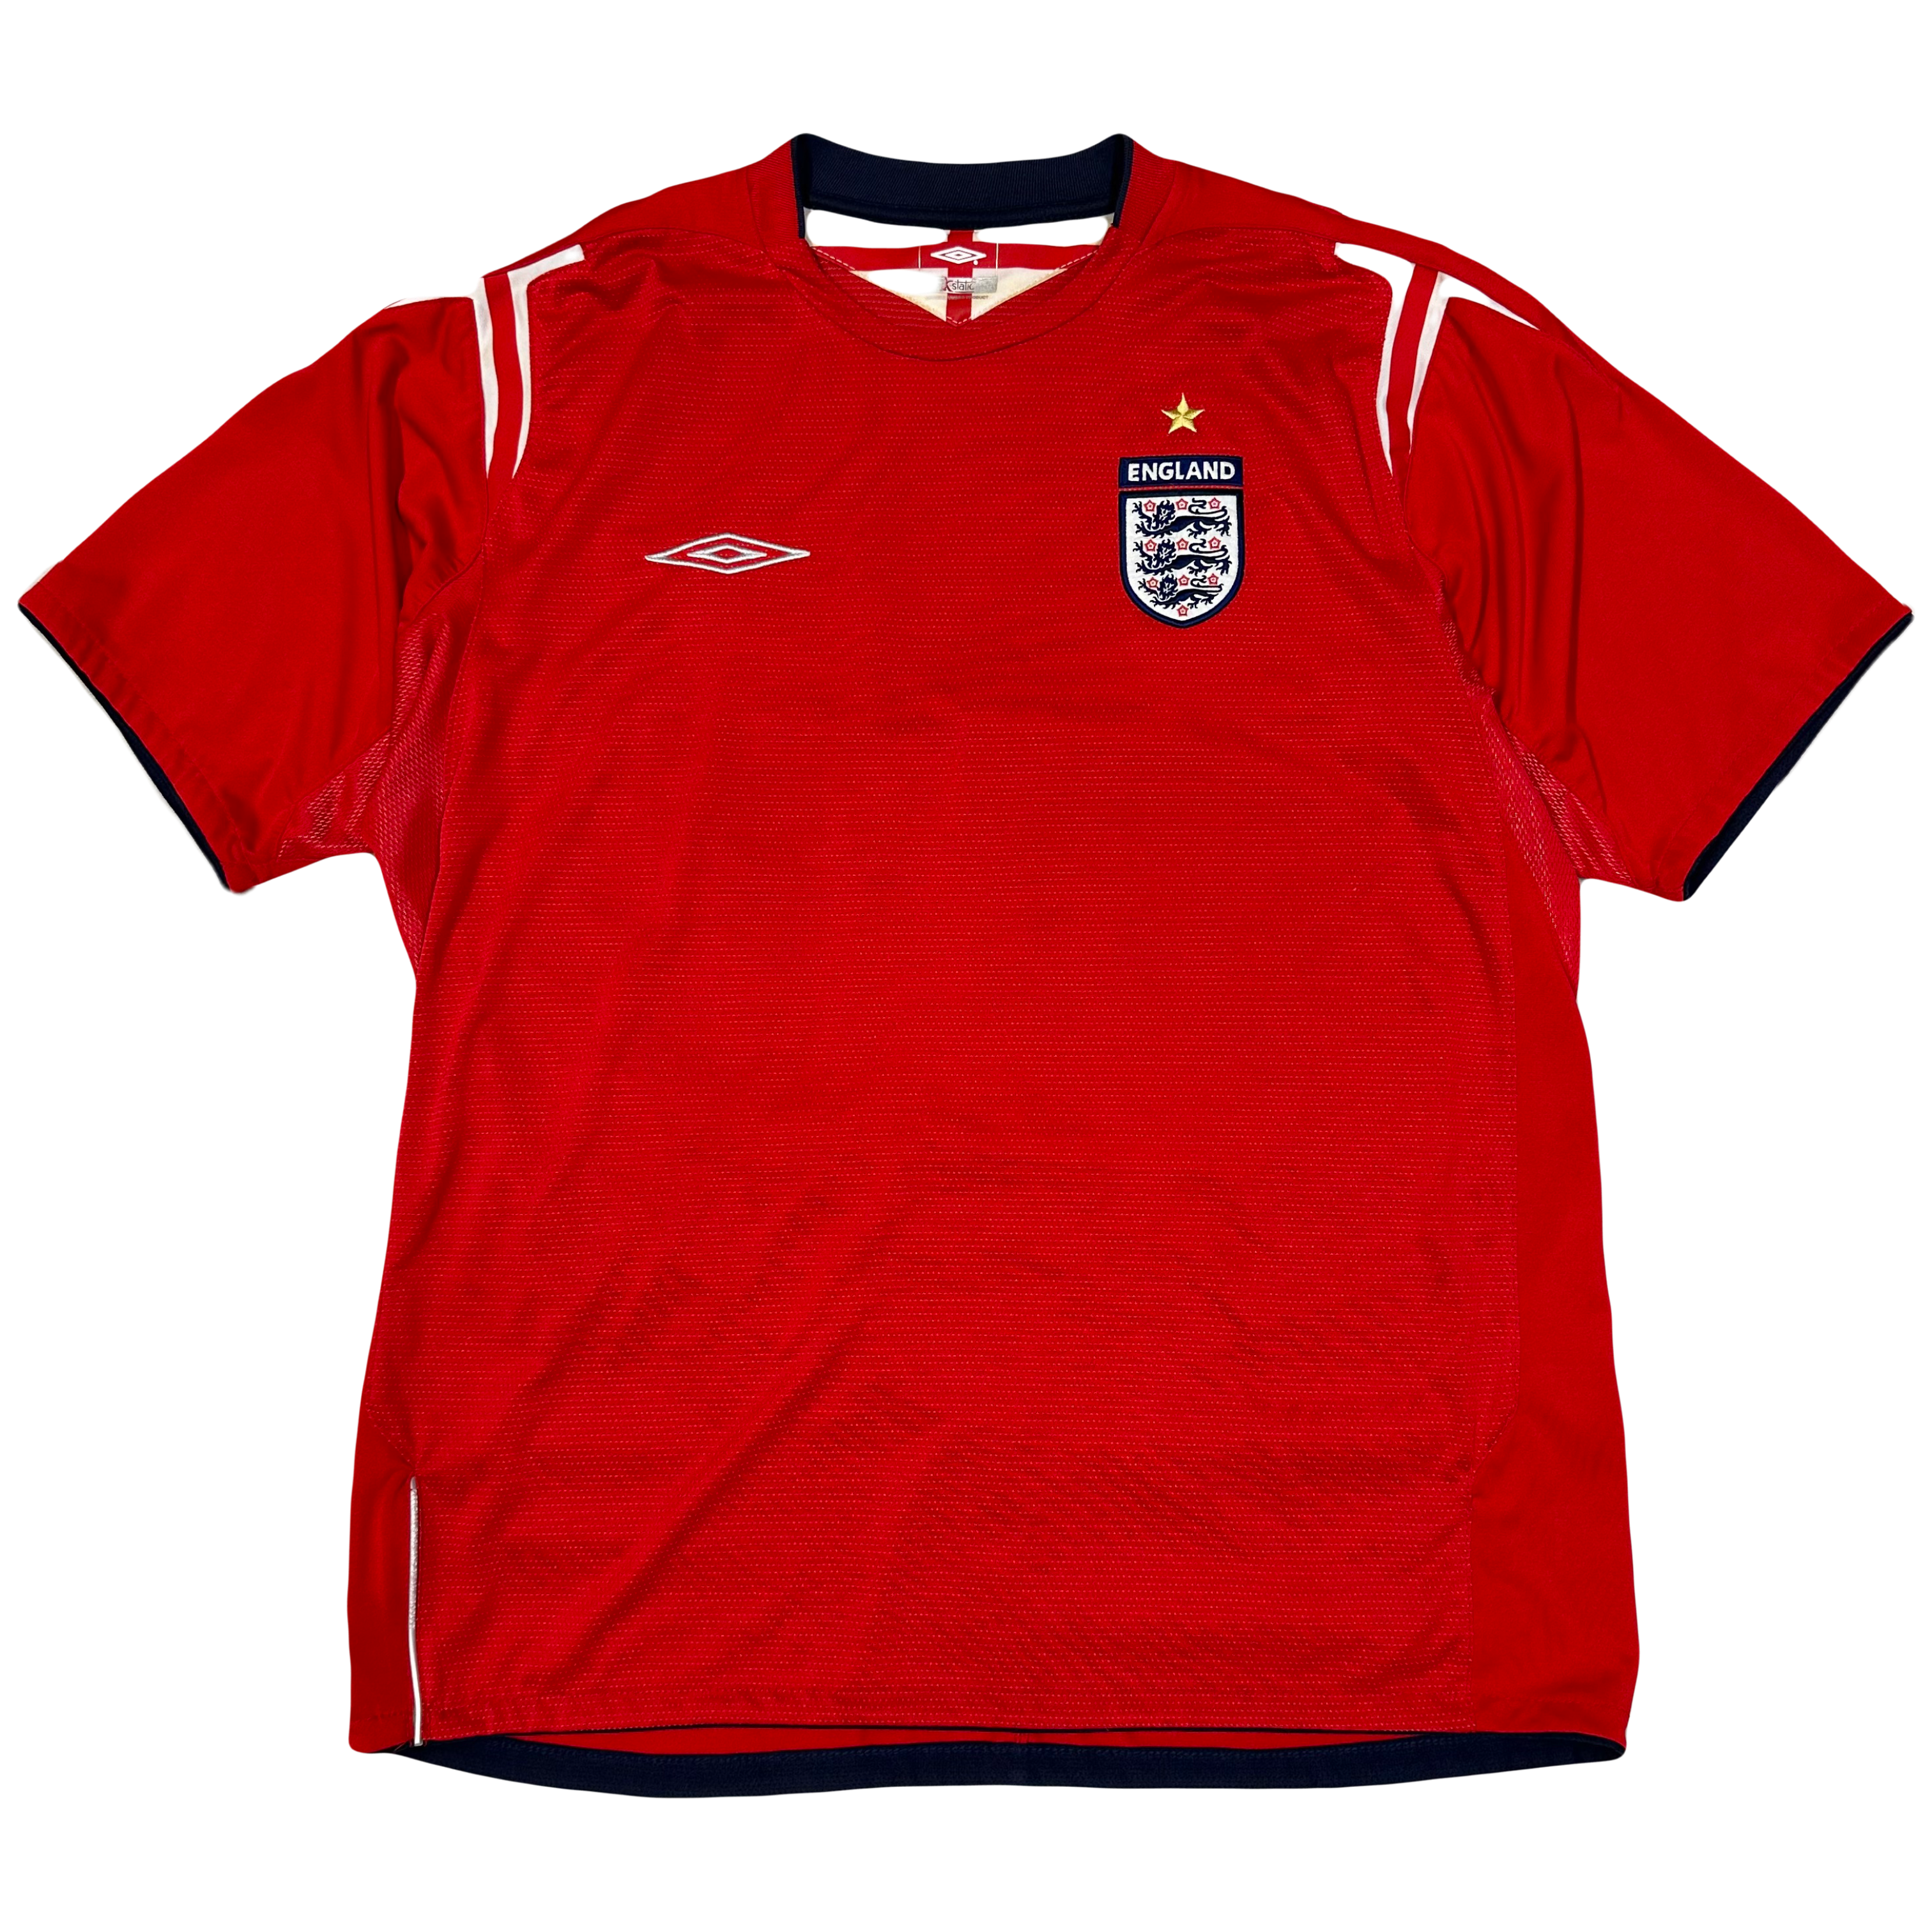 Umbro England 2004/06 Shirt In Red ( XL )